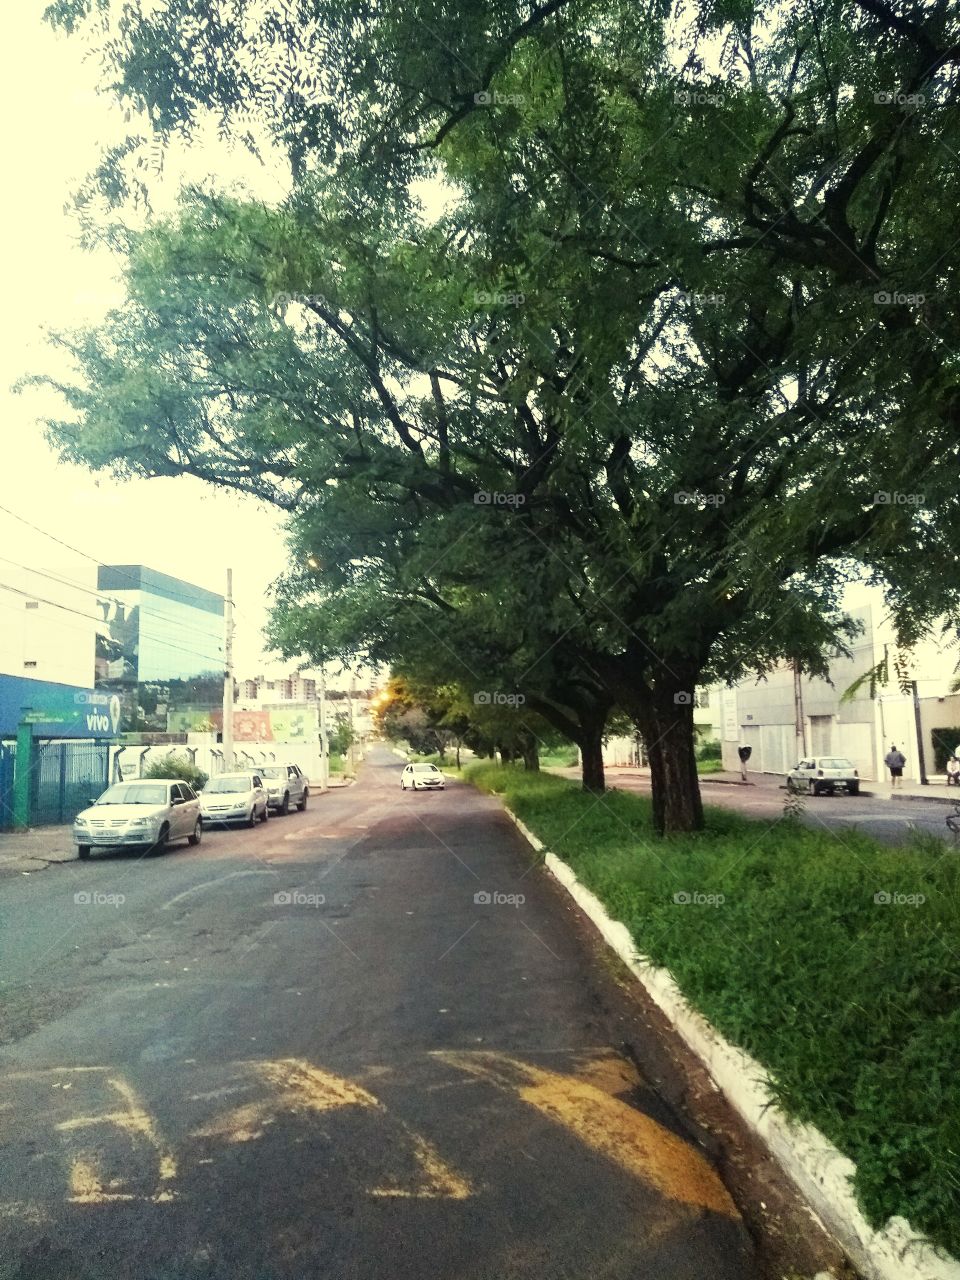 Road, Tree, No Person, Street, Outdoors